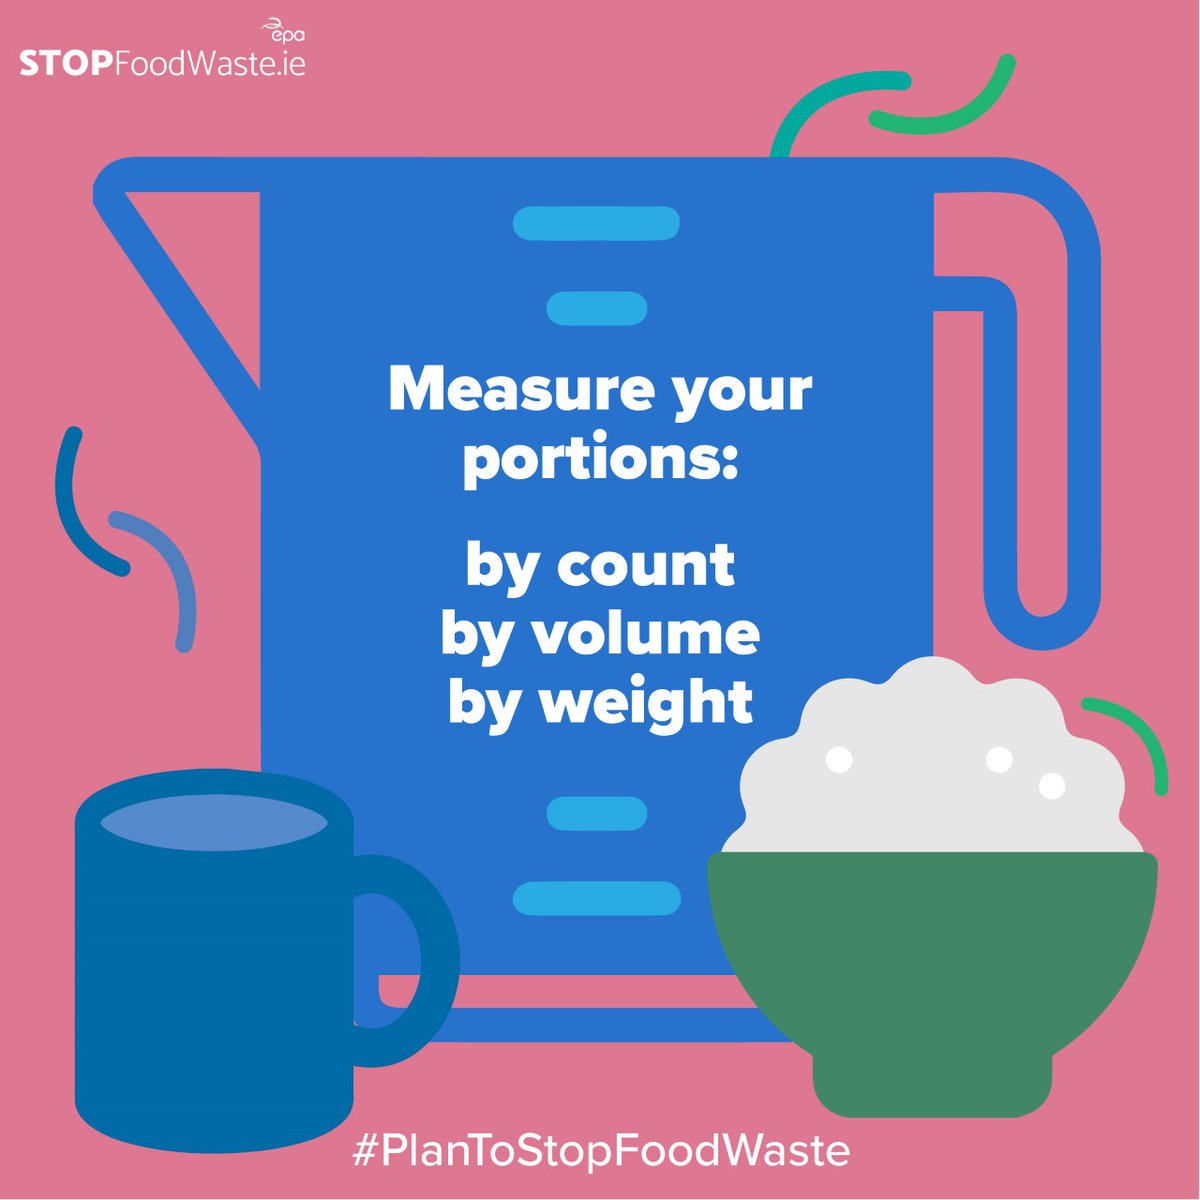 Plan your meal portions and measure out your ingredients to stop food waste!
You can measure your portions:

• by count (e.g. number of potatoes)
• by volume (cups, spoons and ladles)
• by weight

Visit stopfoodwaste.ie/resource/perfe… for more tips on how to #PlanToSTopFoodWaste